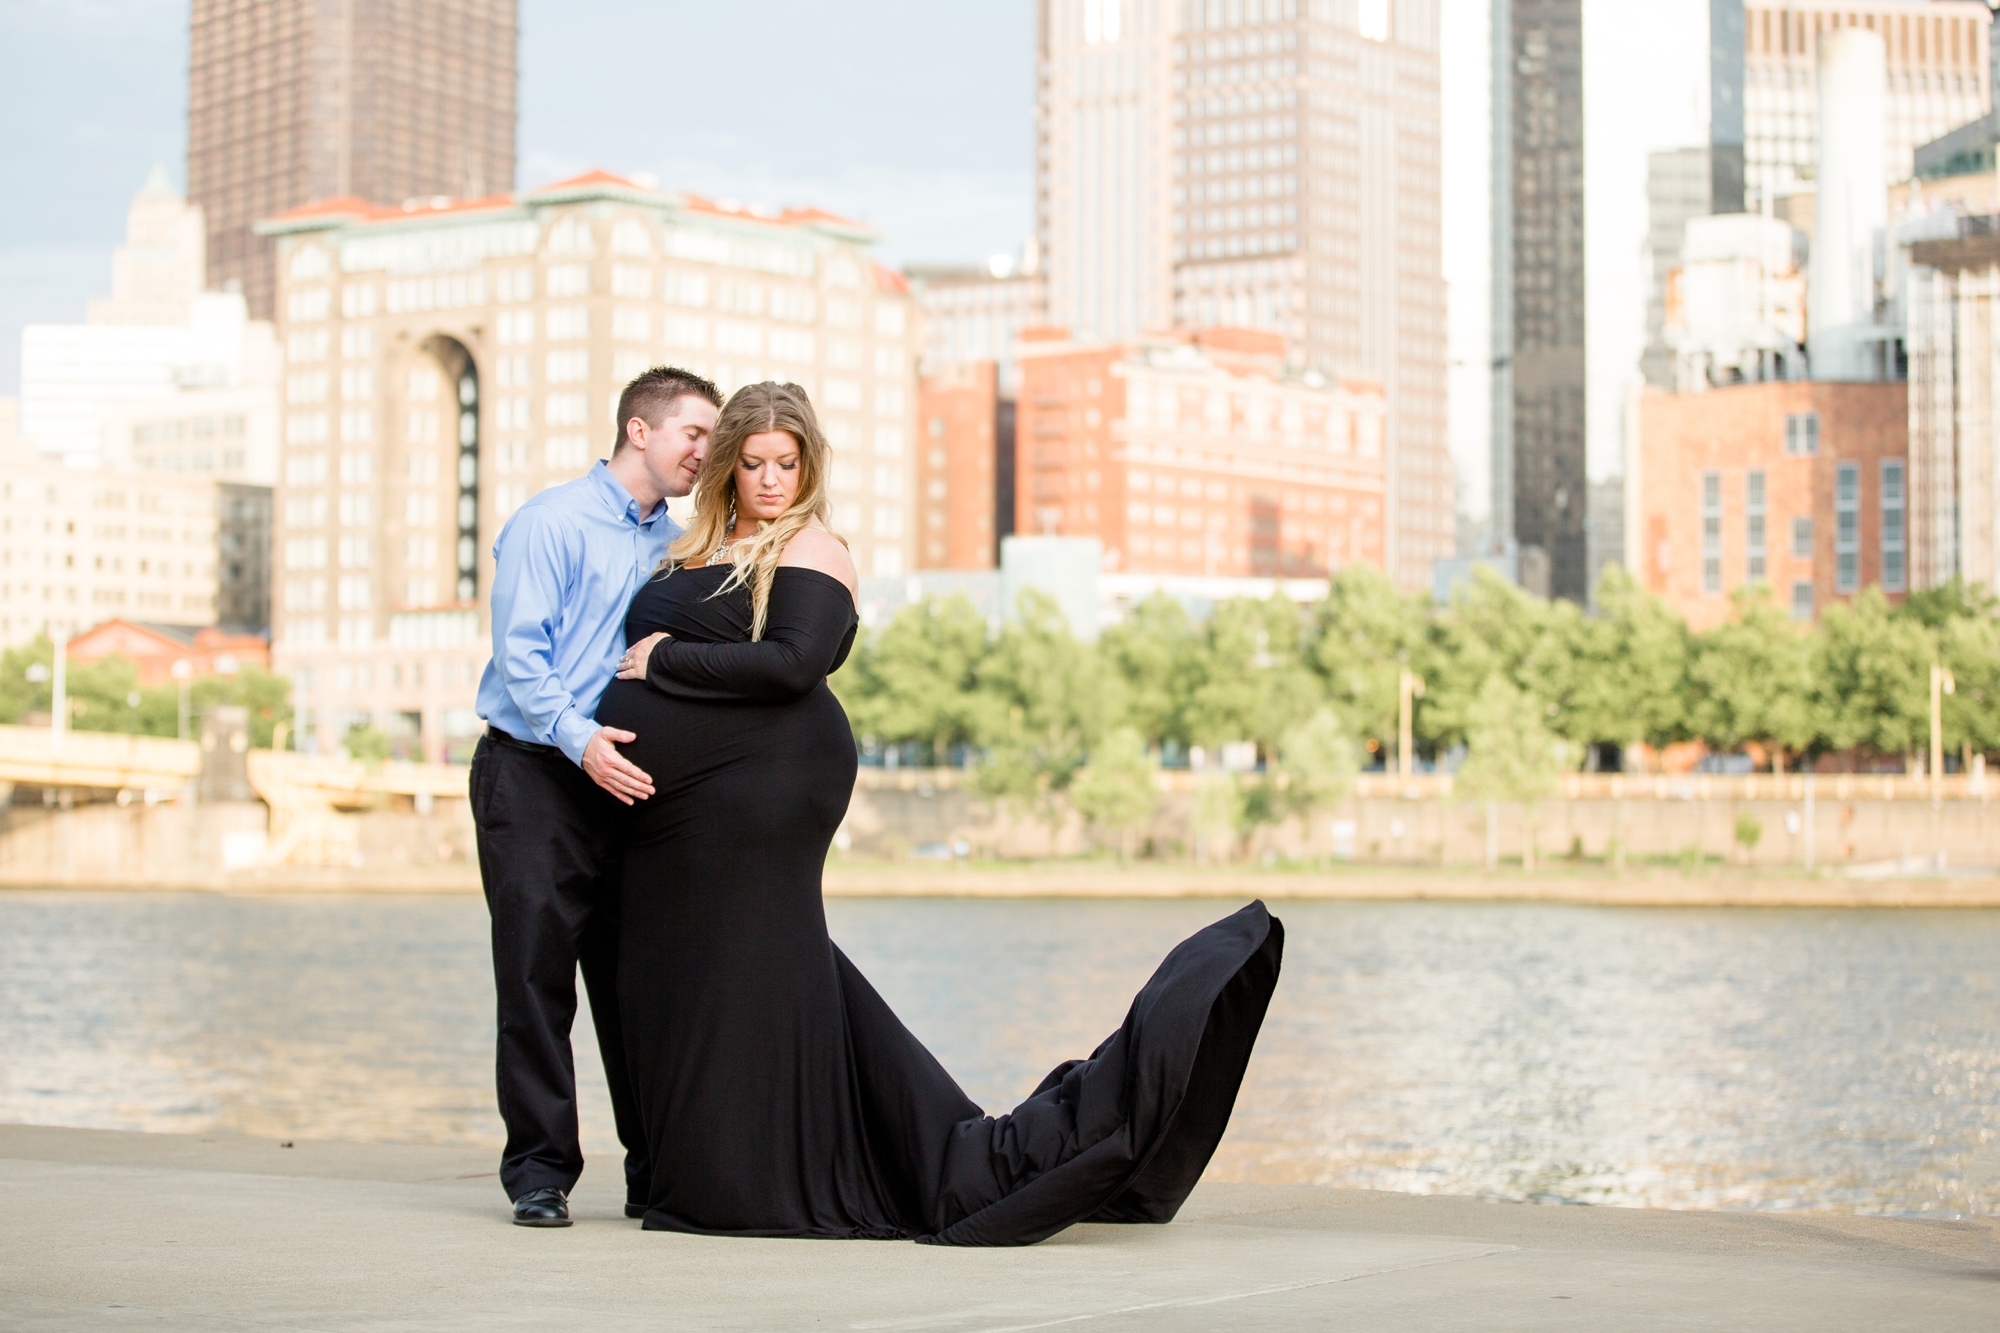 pittsburgh maternity photographer, pittsburgh family photographer, allegheny commons park, north side, north shore, cranberry township family photographer